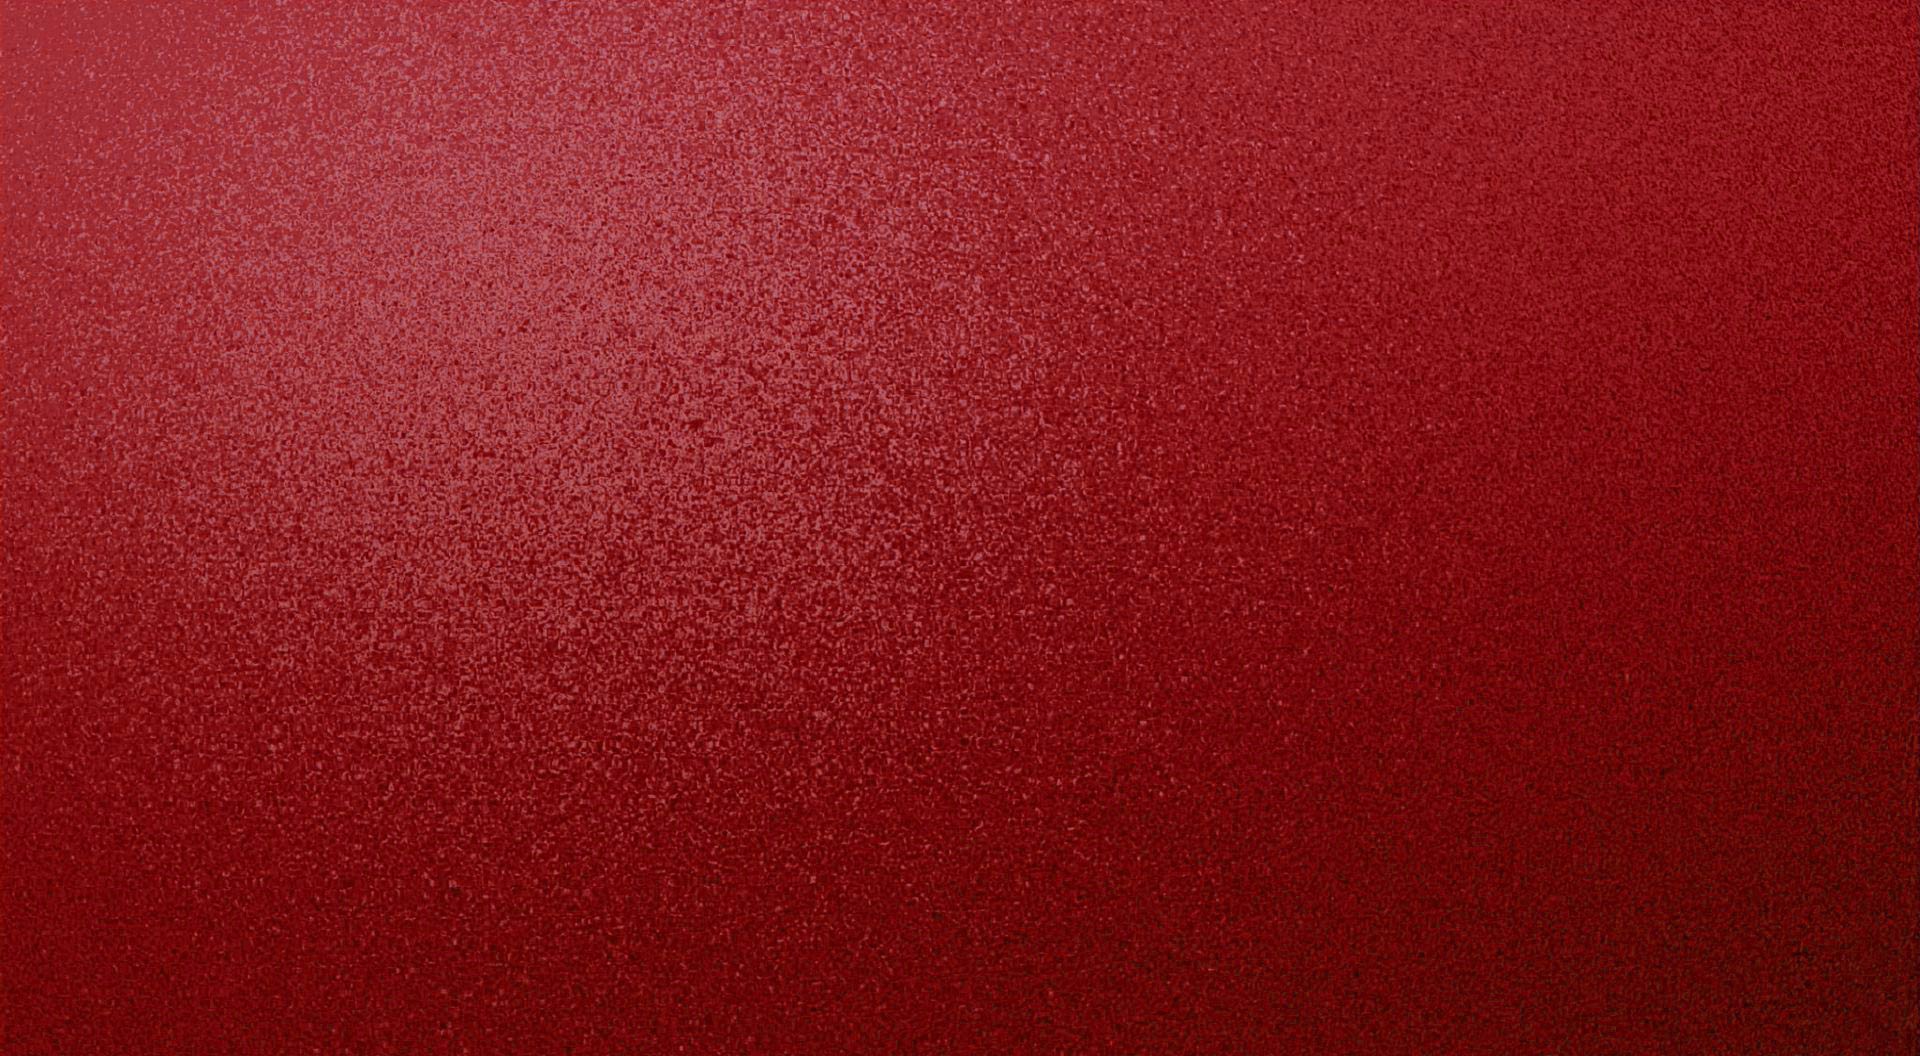 Red Textured Speckled Desktop Background Wallpaper For Use With Mac